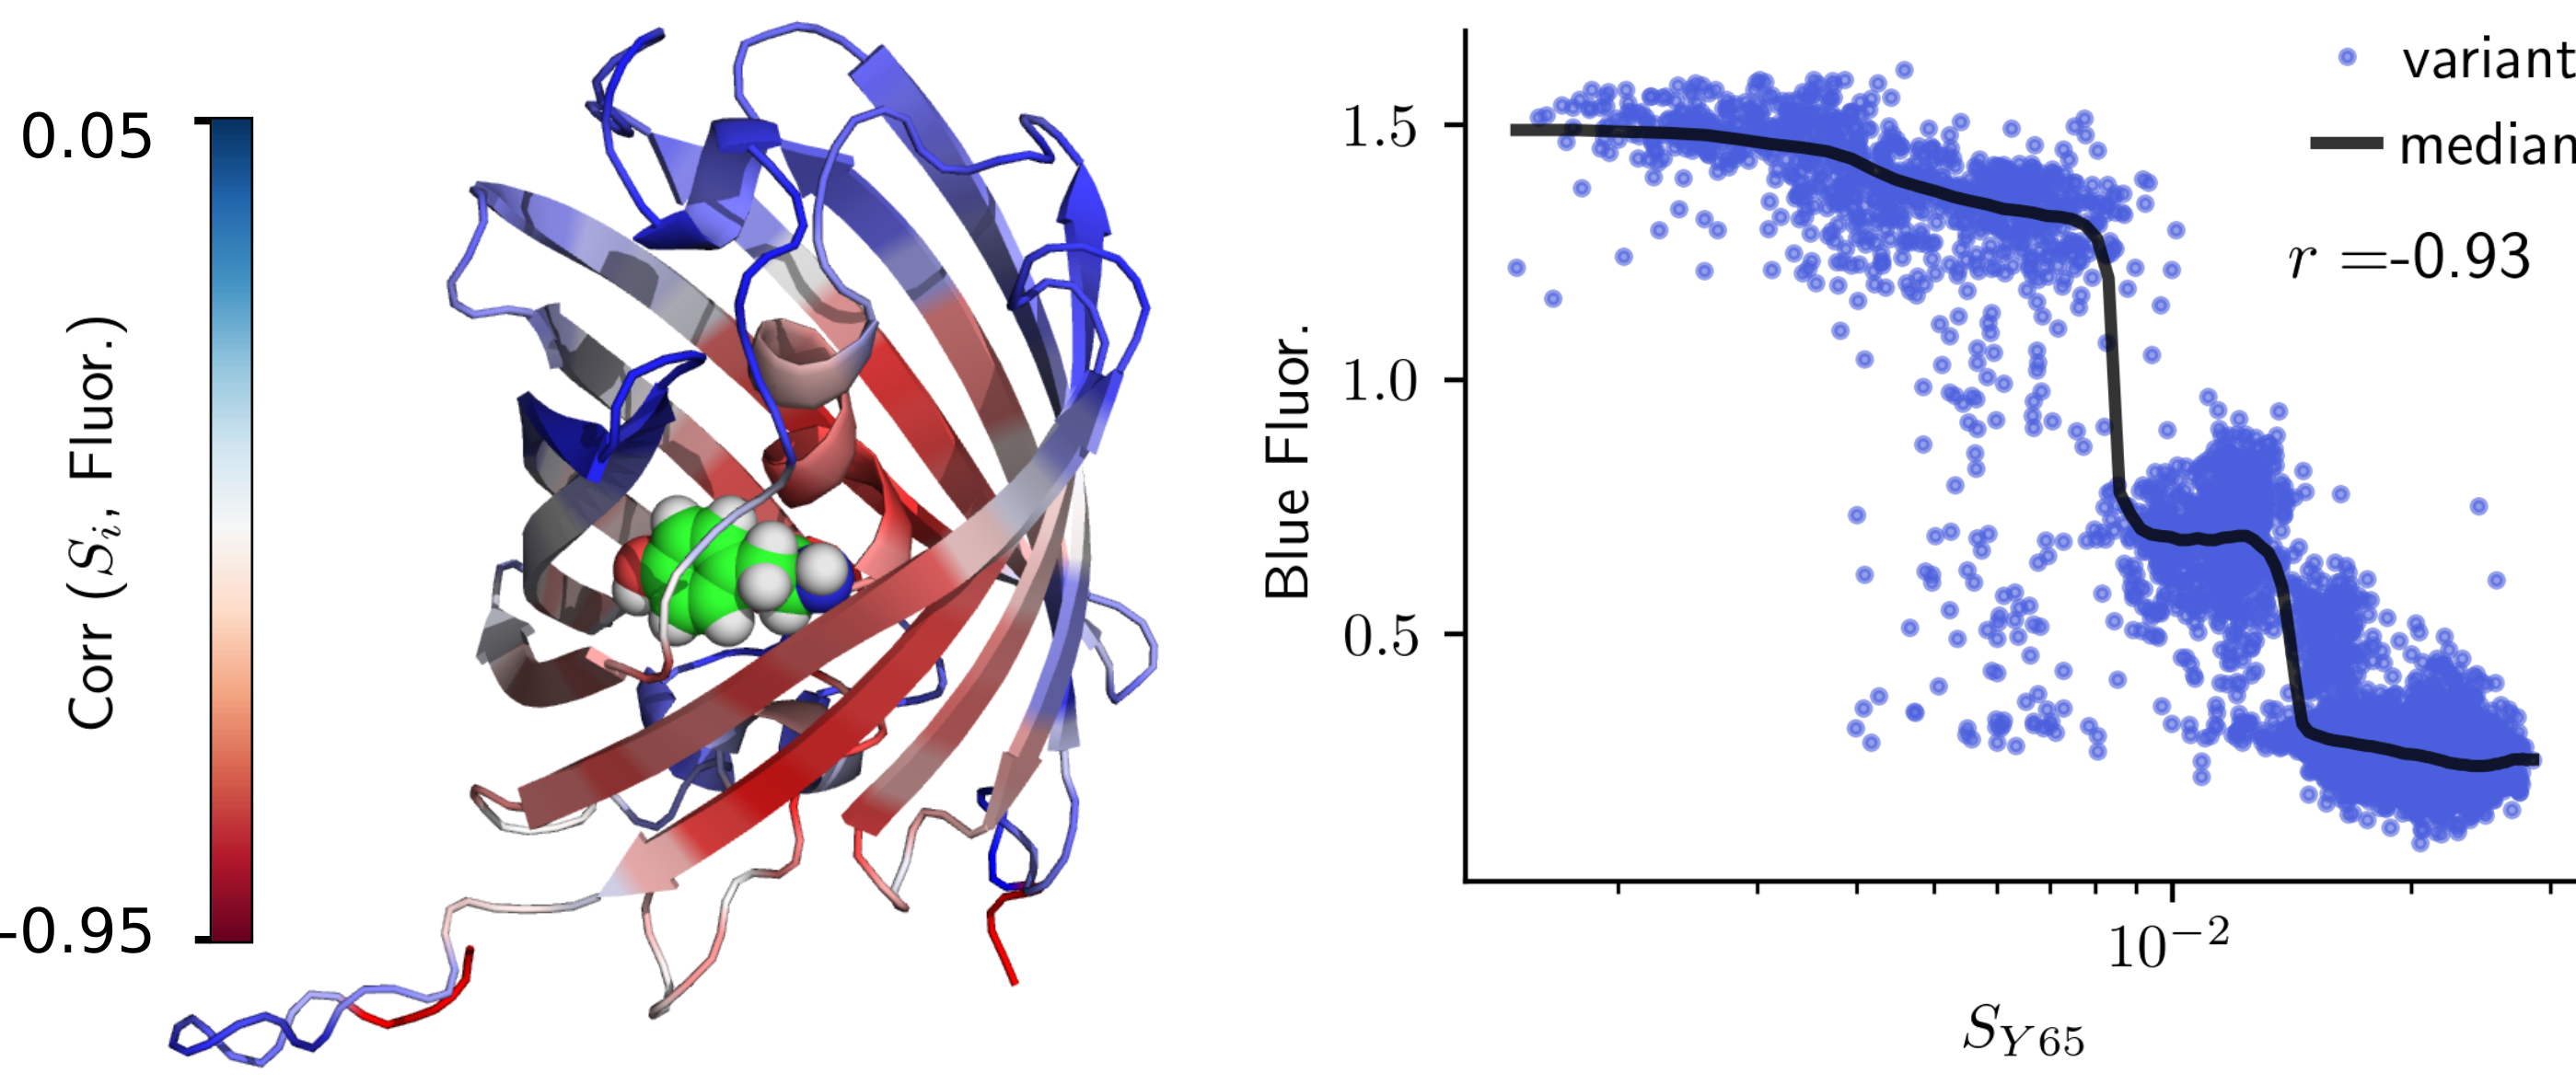 Figure 2. The structure of the blue fluorescent protein is shown, colored according to how well strain at each residue correlates with fluorescence. The atoms of the tryptophan residue (Y65) that bind to a chromophore are shown by spheres. Deformation at this residue, SY65, leads to decreases in fluorescence in a two-step manner.